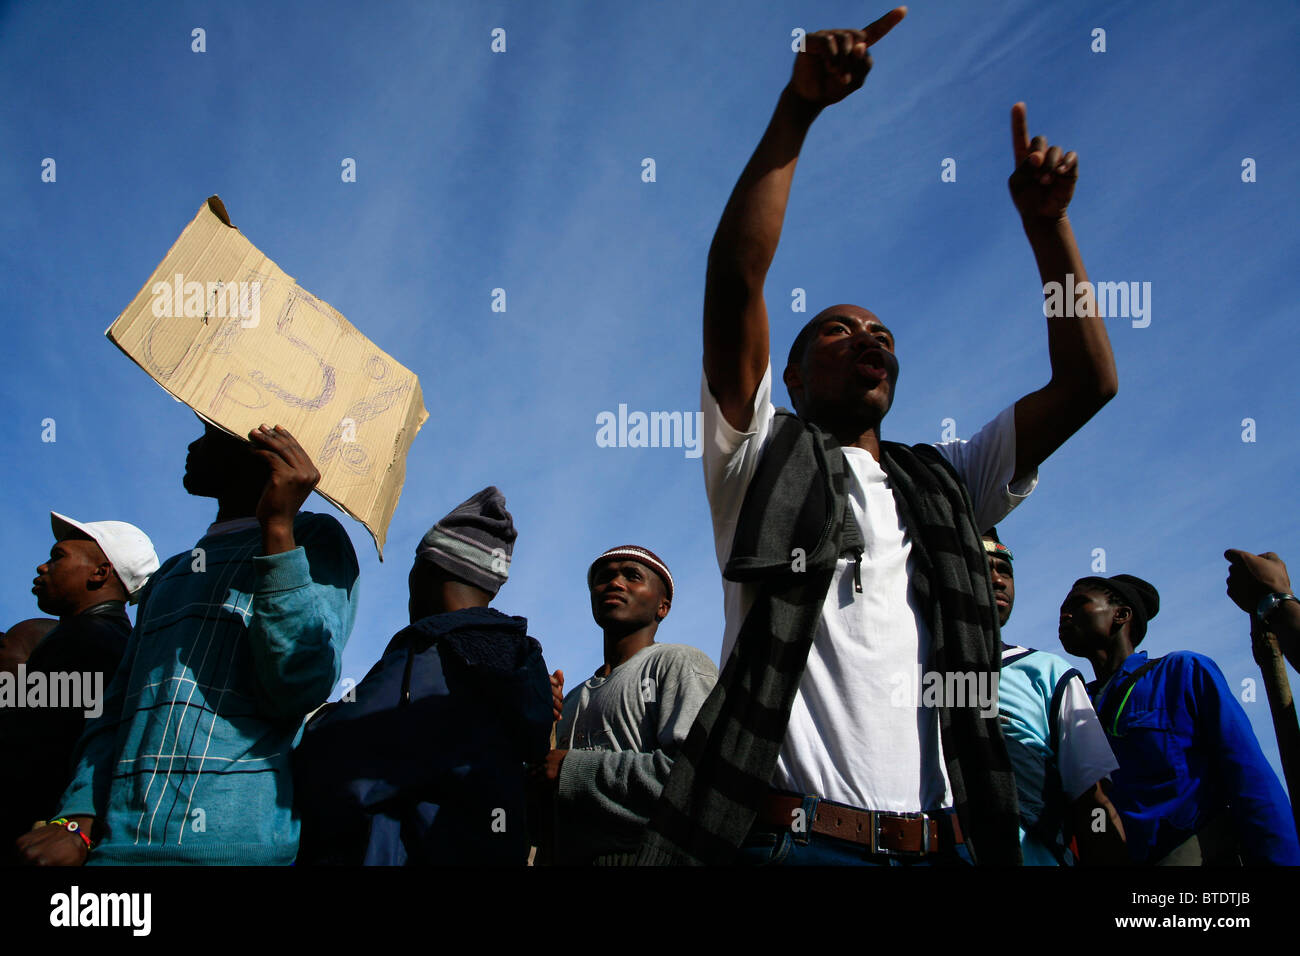 Workers on strike for higher wages Stock Photo